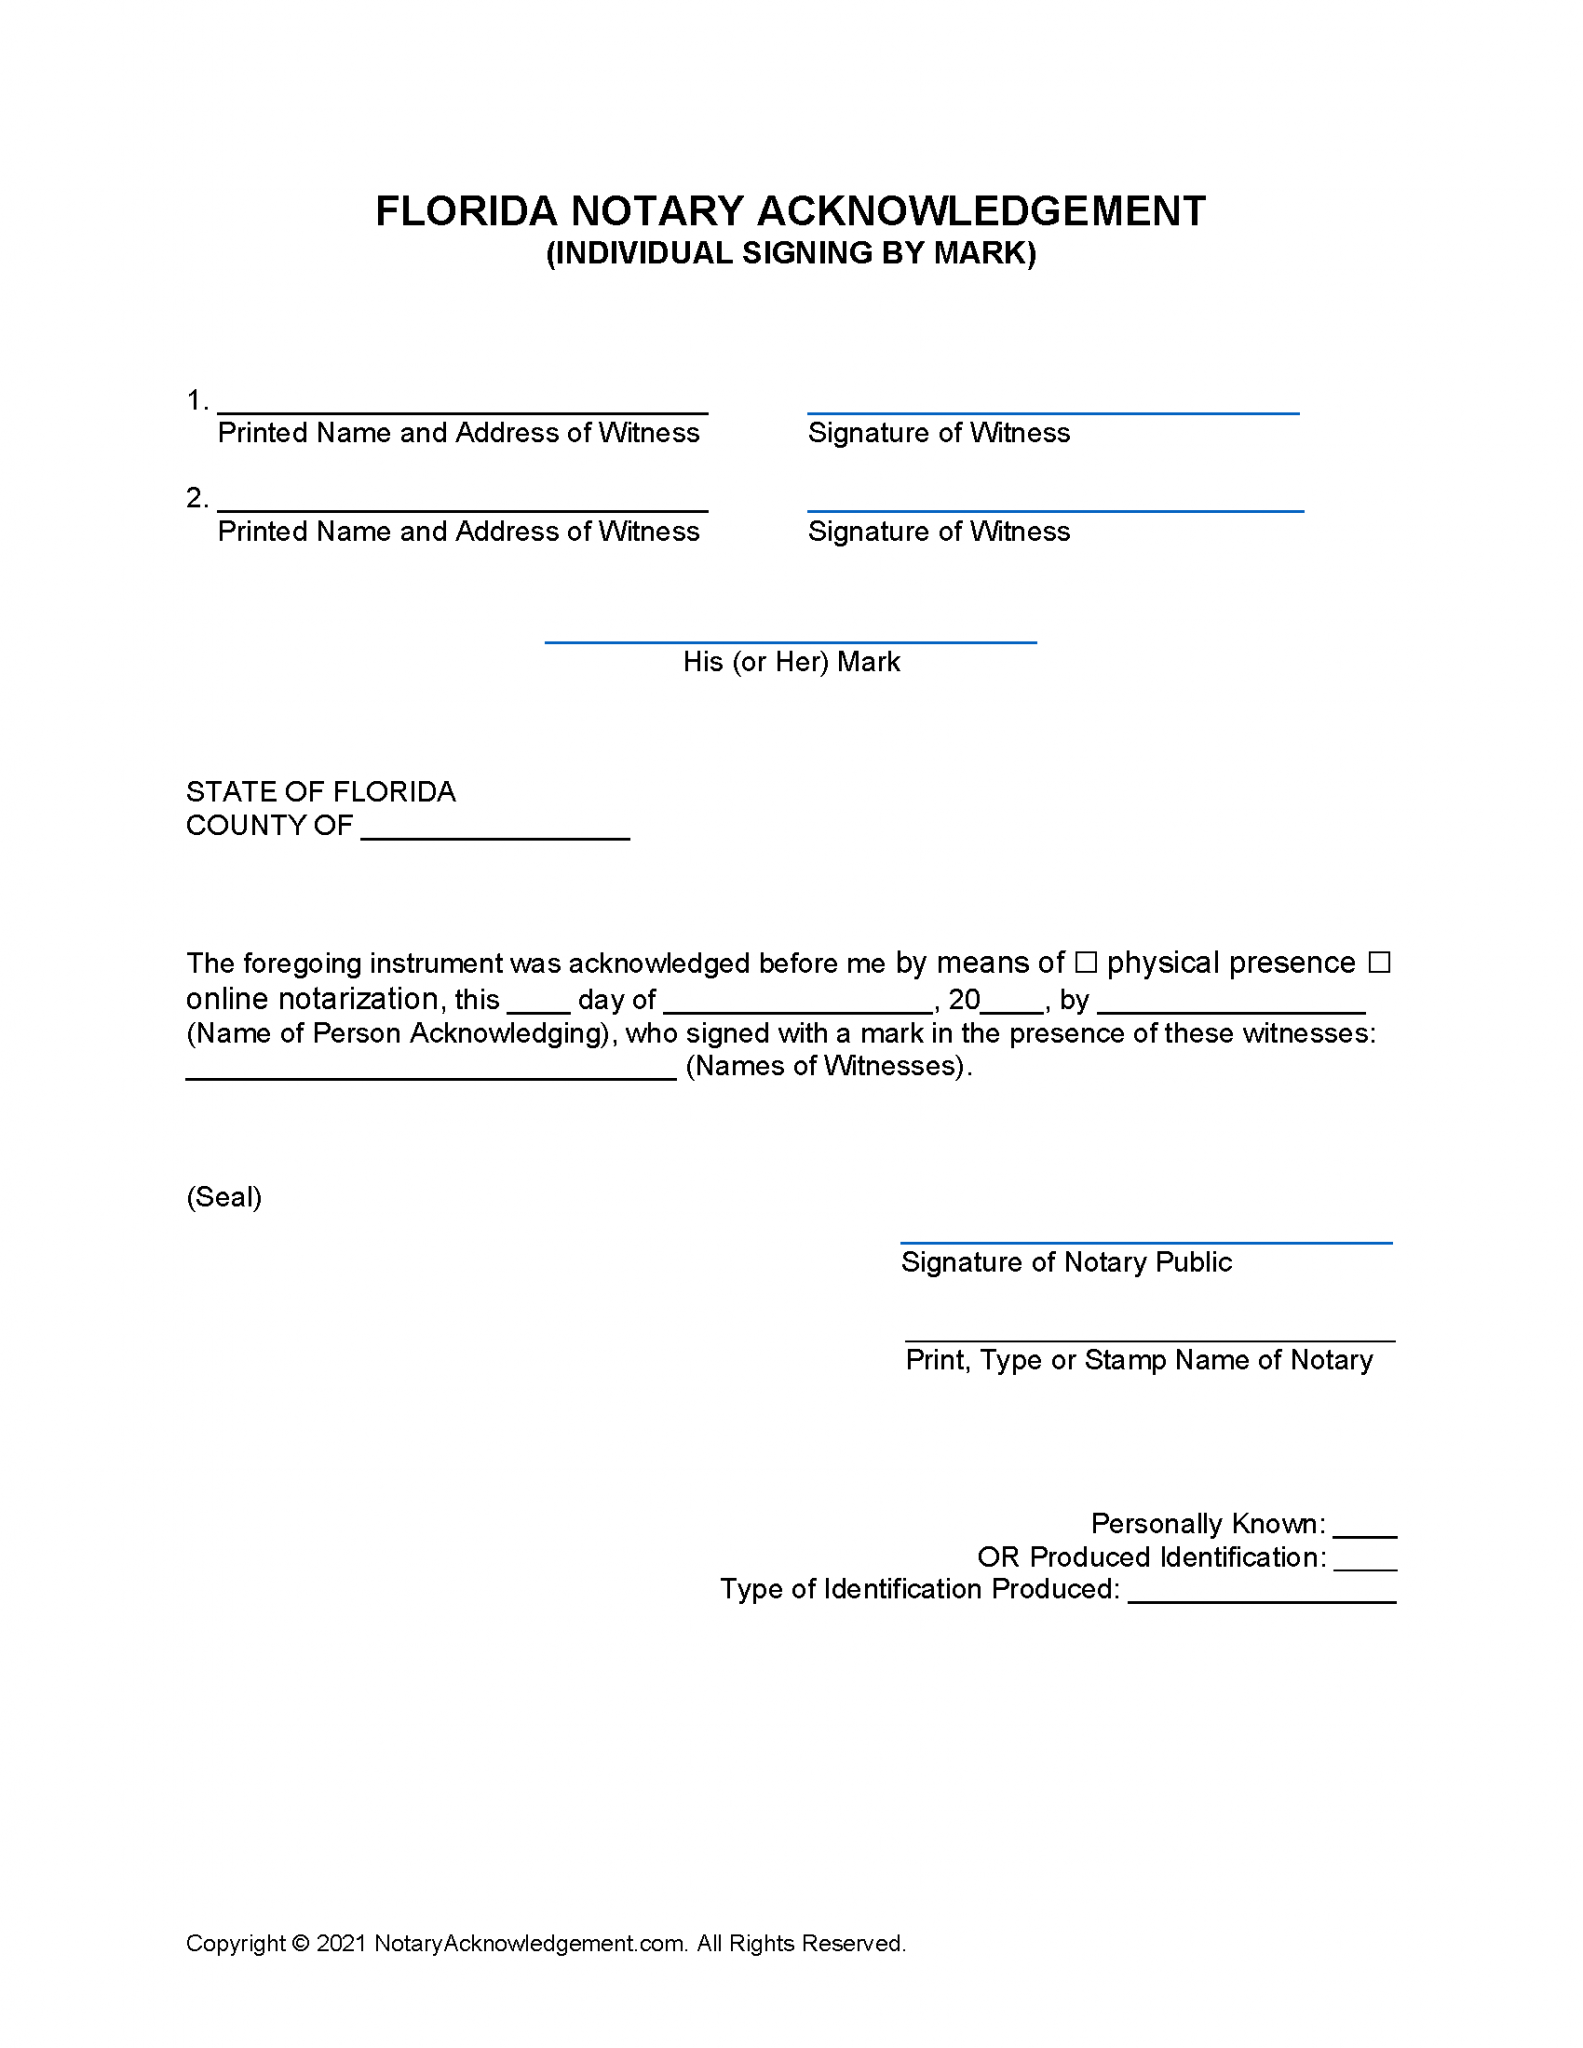 Free Florida Notary Acknowledgement Individual Signing by Mark PDF